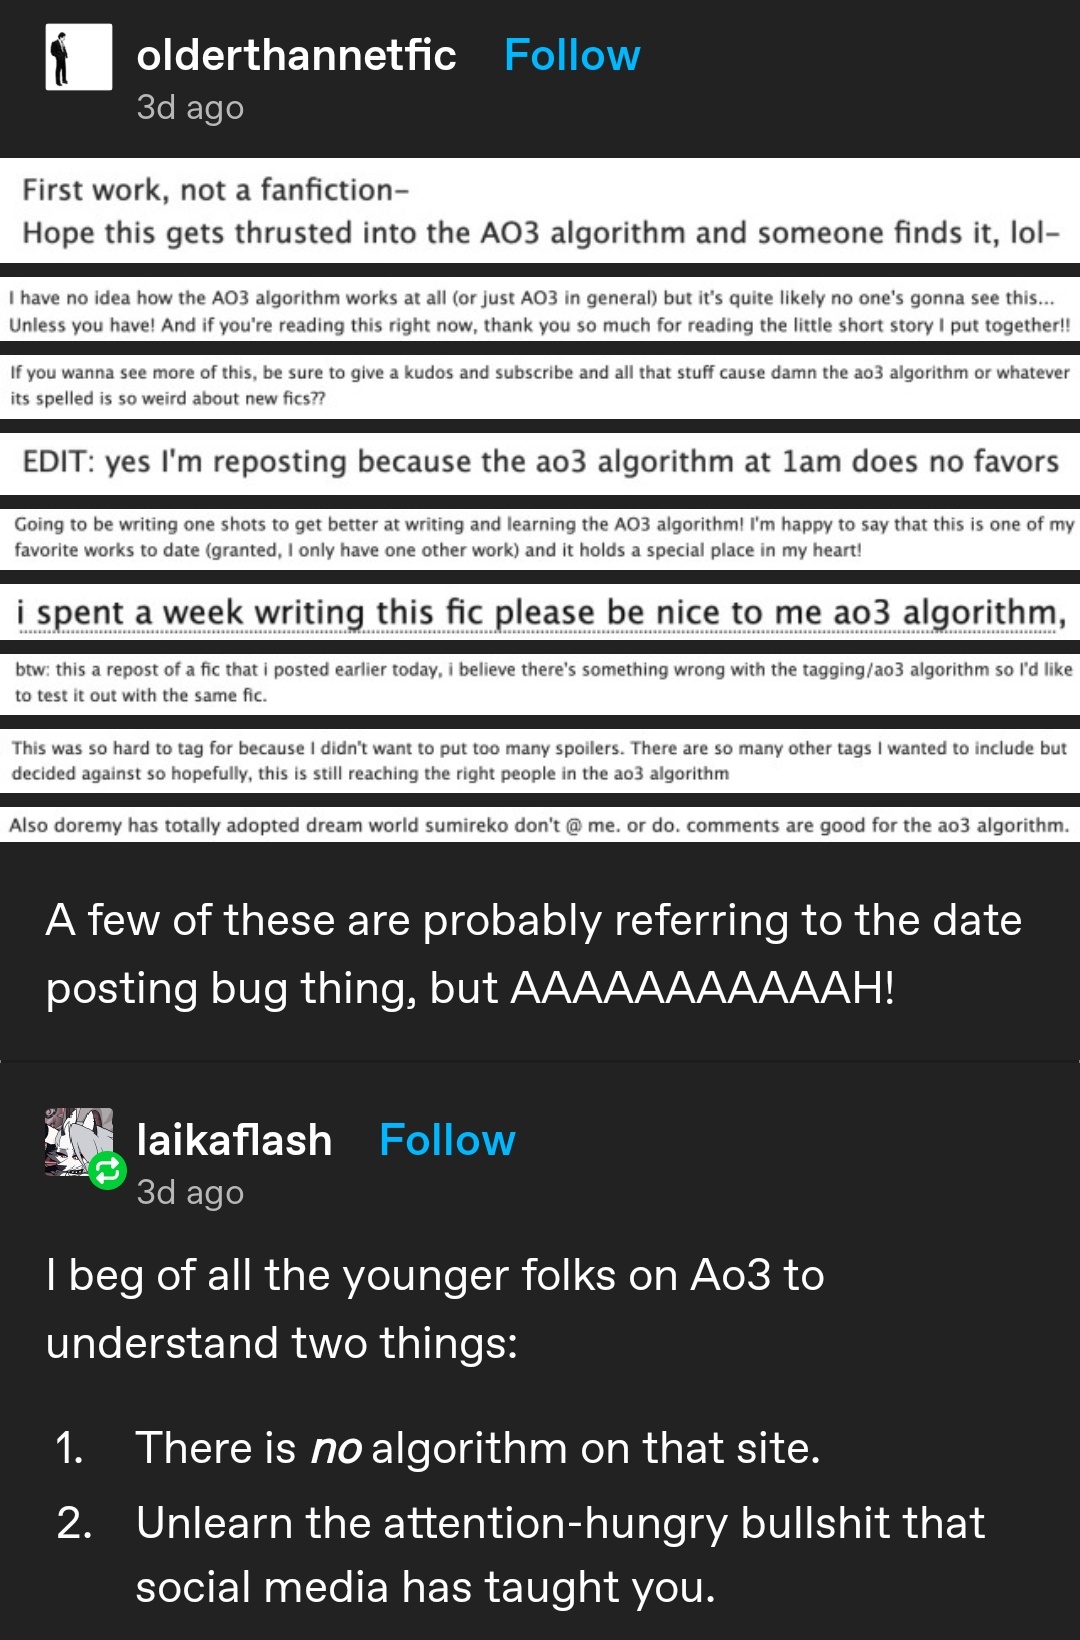 A tumblr post showing younger people hoping to be "blessed by the algorithm" on AO3, a fanfiction website without any suggestion algorithms.